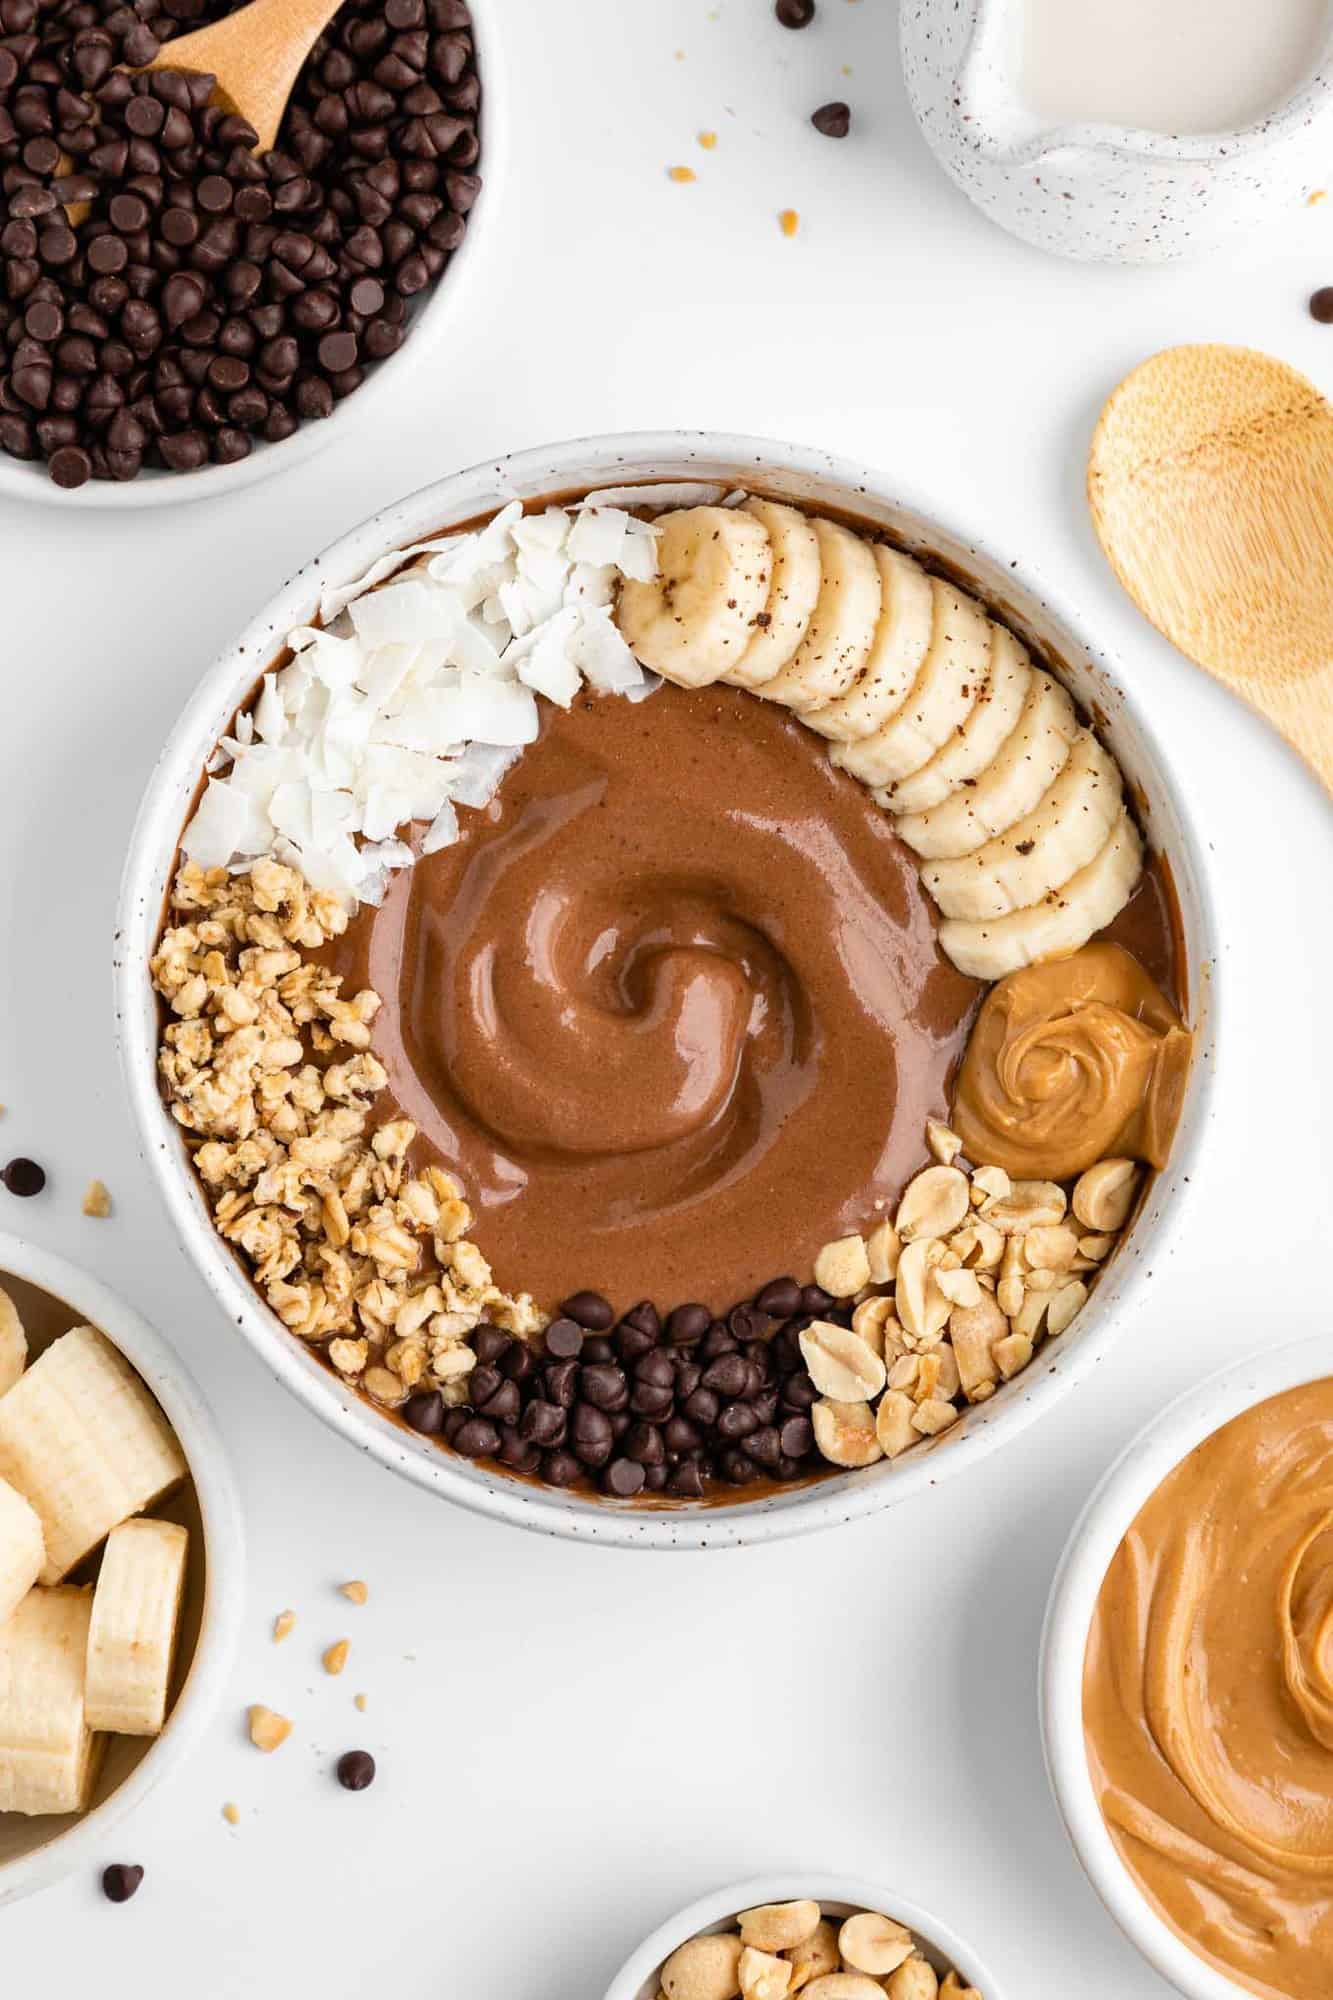 How to Whip up Delicious Nut Butter in a Blender: A Step-by-Step Guide